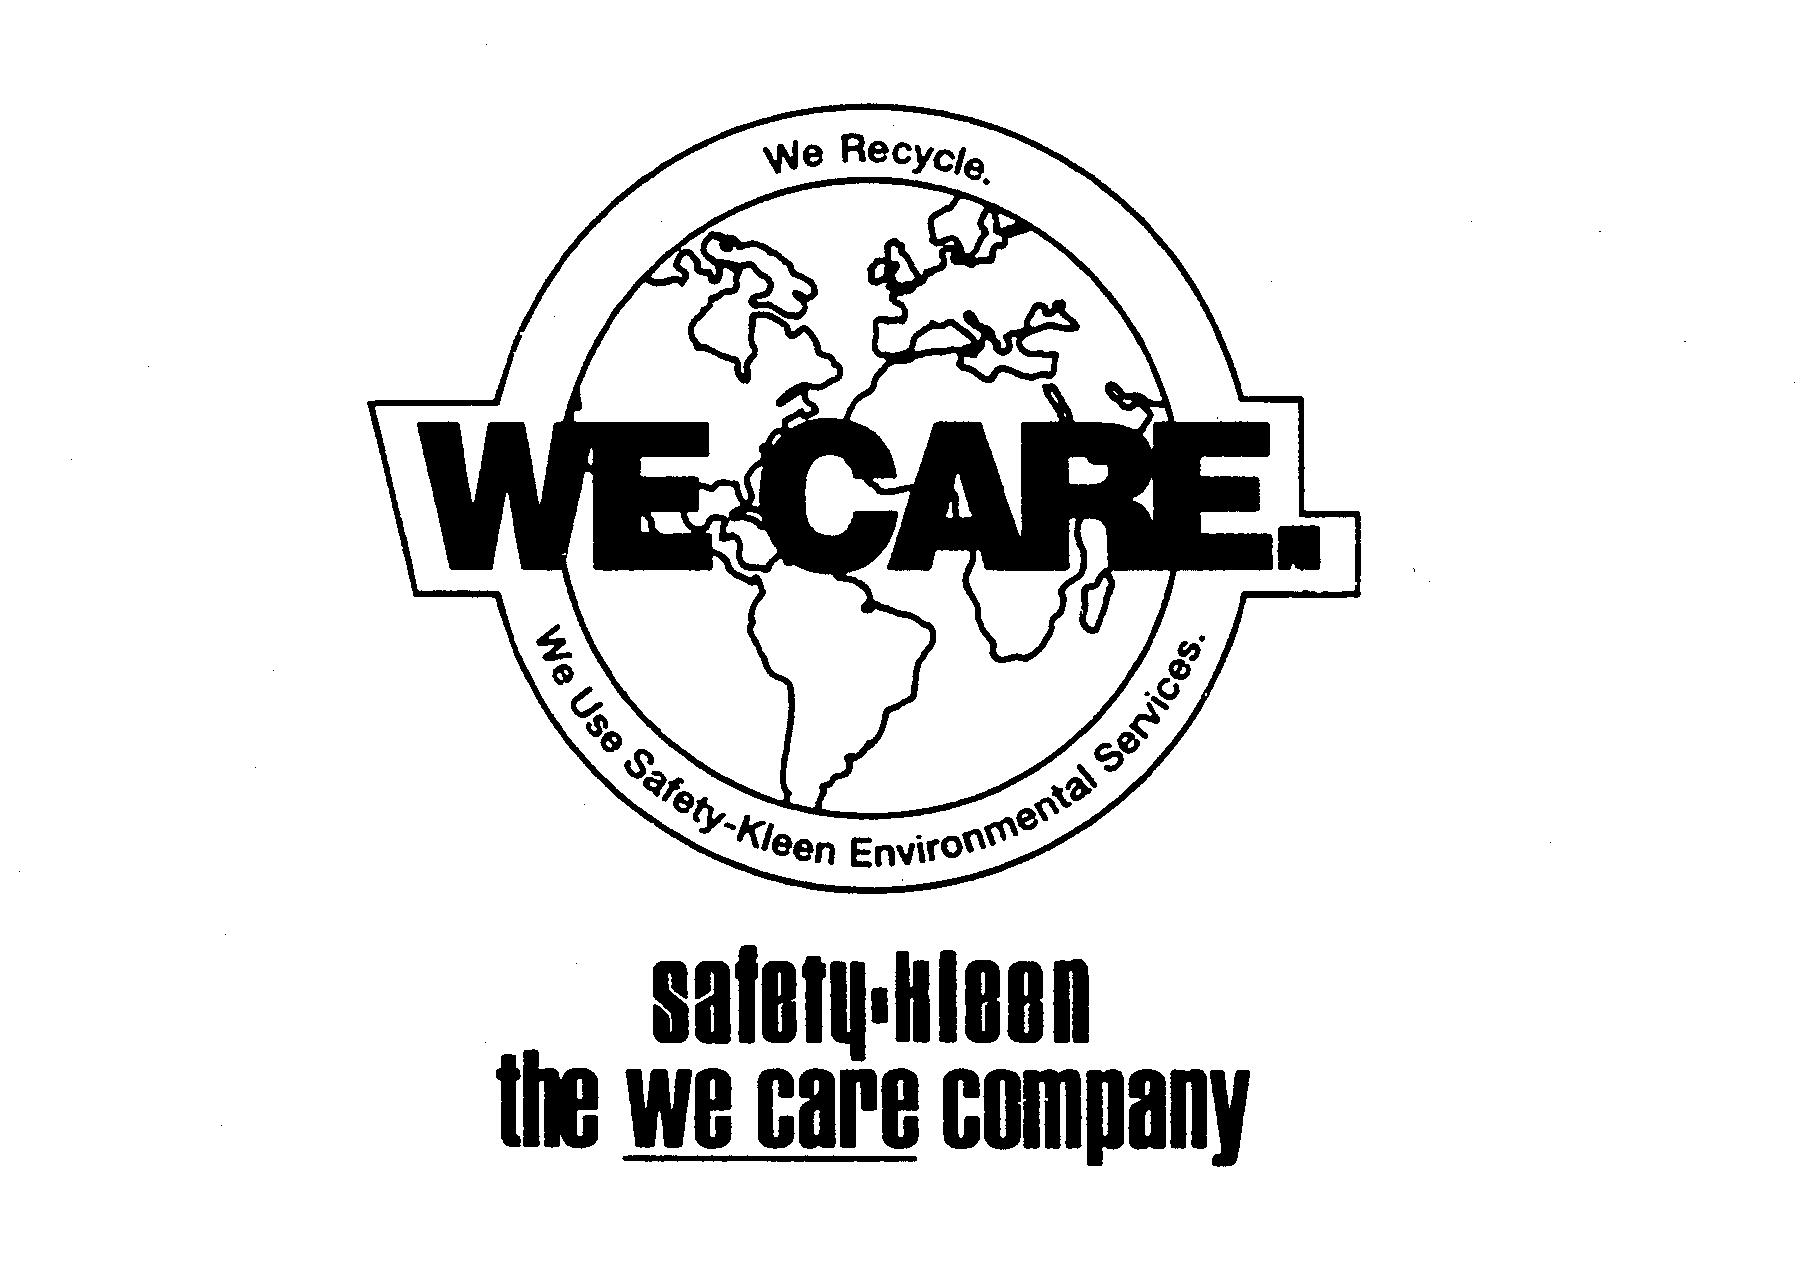  WE CARE. SAFETY-KLEEN THE WE CARE COMPANY WE RECYCLE. WE USE SAFETY-KLEEN ENVIRONMENTAL SERVICES.